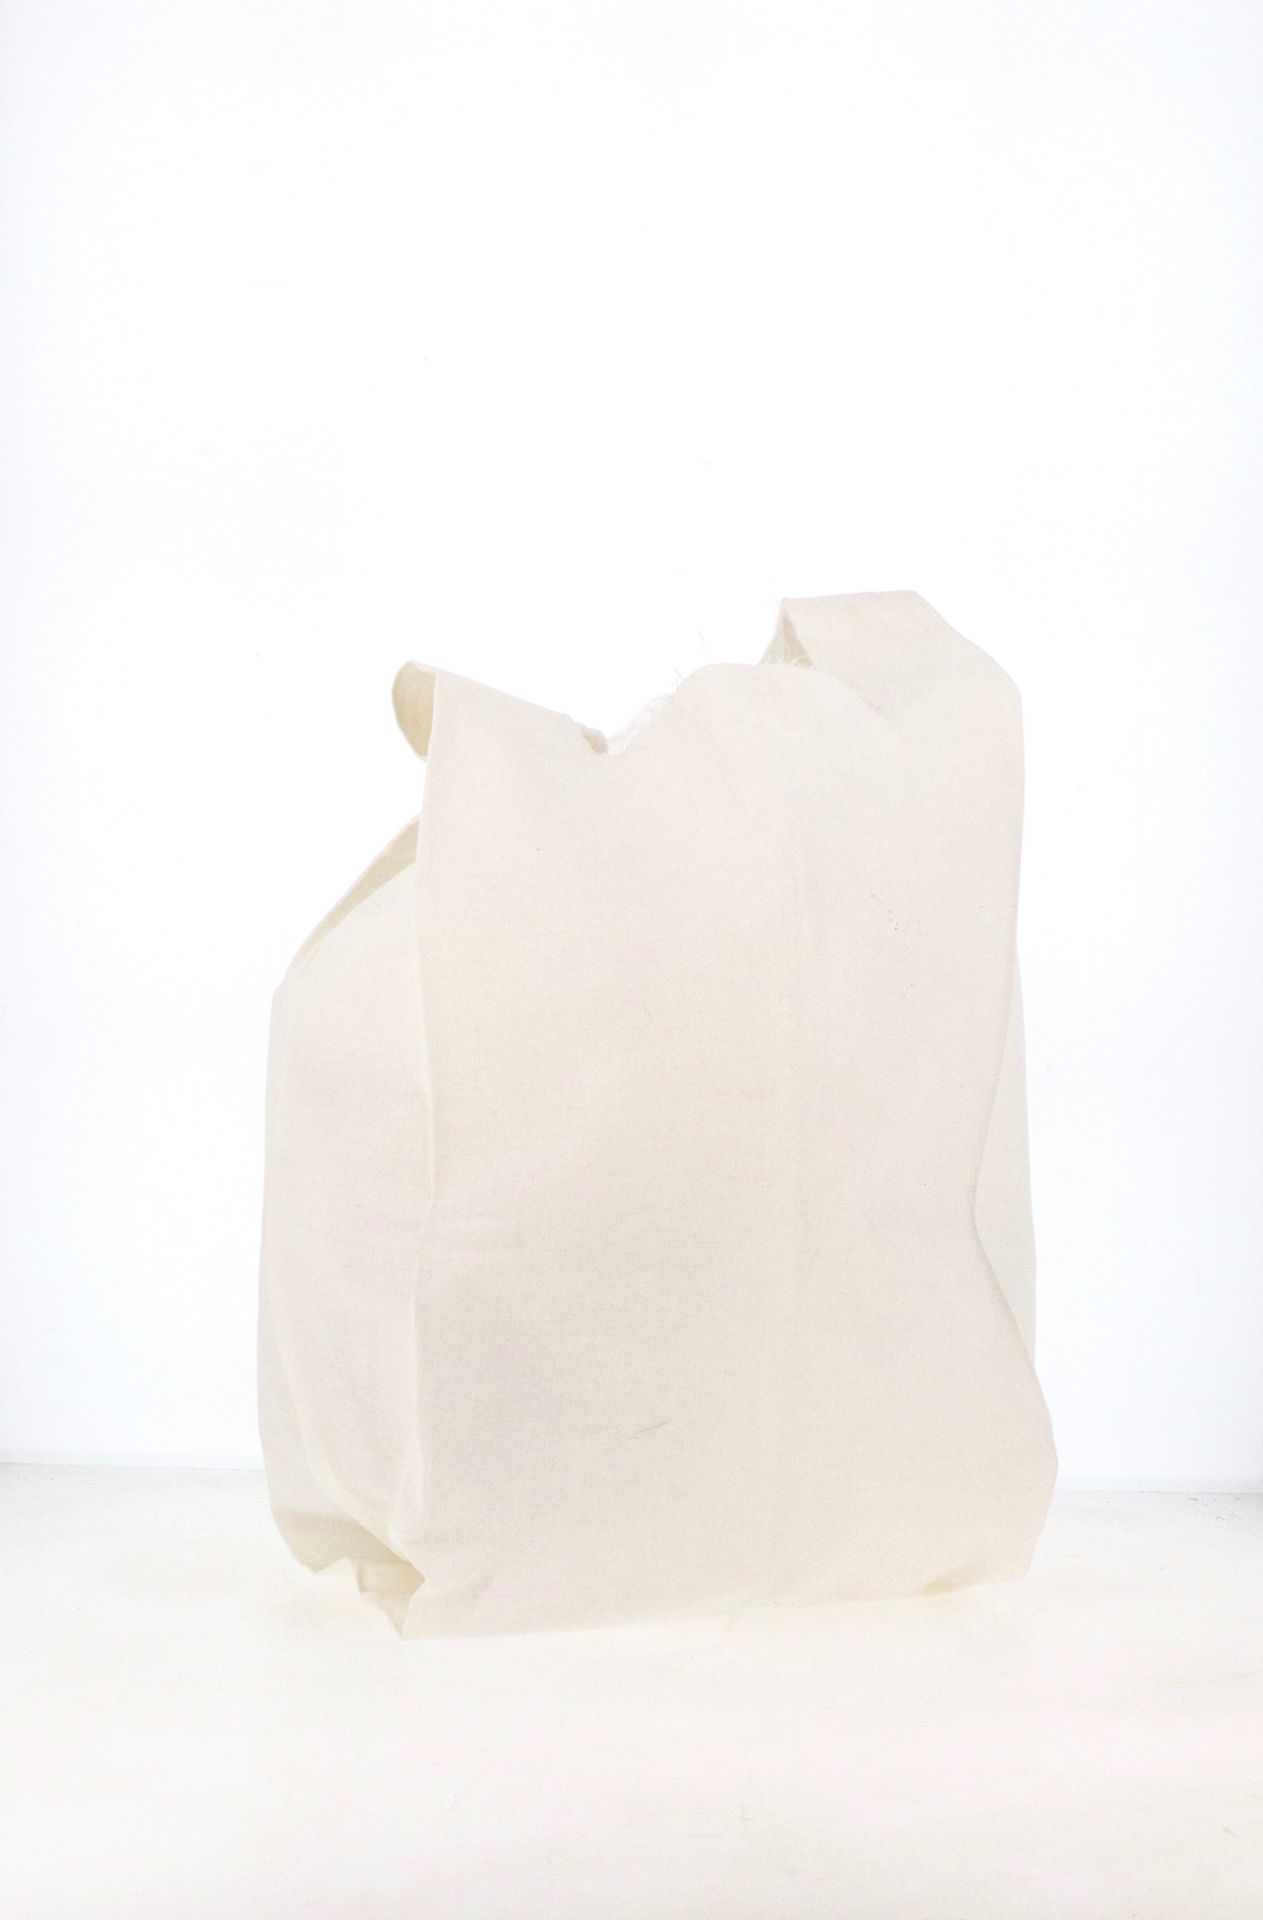 MAISON MARTIN MARGIELA Shopping bag 

in white cotton

About 58 x 29 cm

Without&hellip;